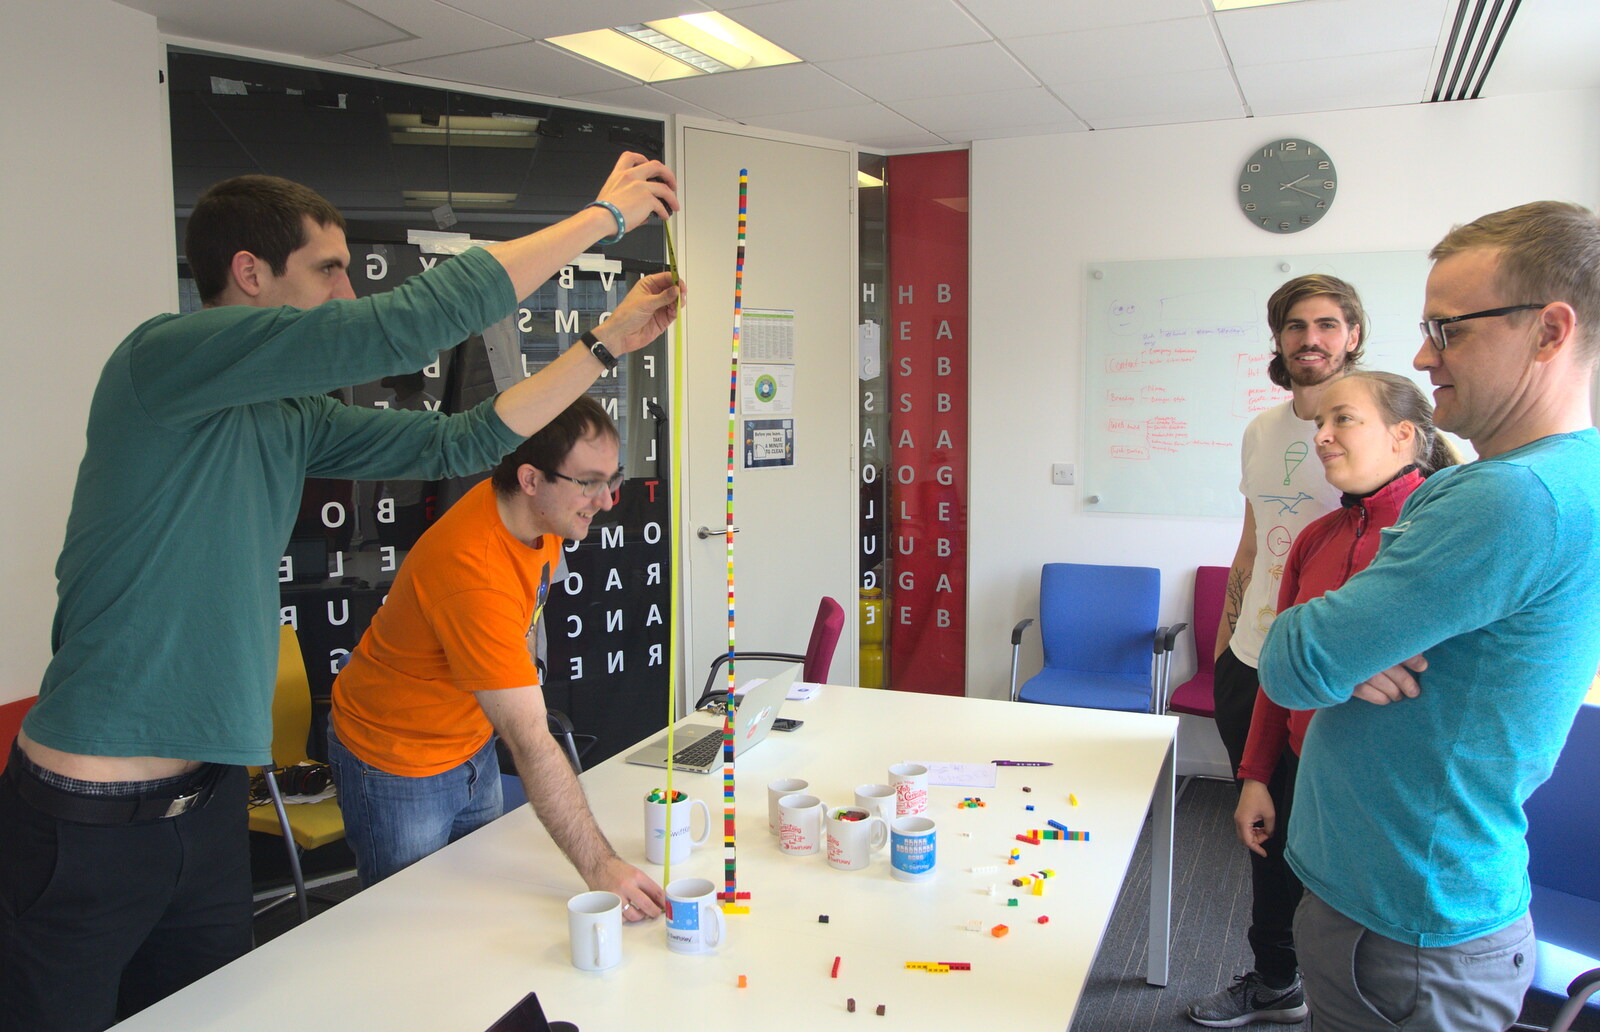 Lachie and Fran measure a Lego tower from A SwiftKey Innovation Week, Southwark, London - 22nd April 2016